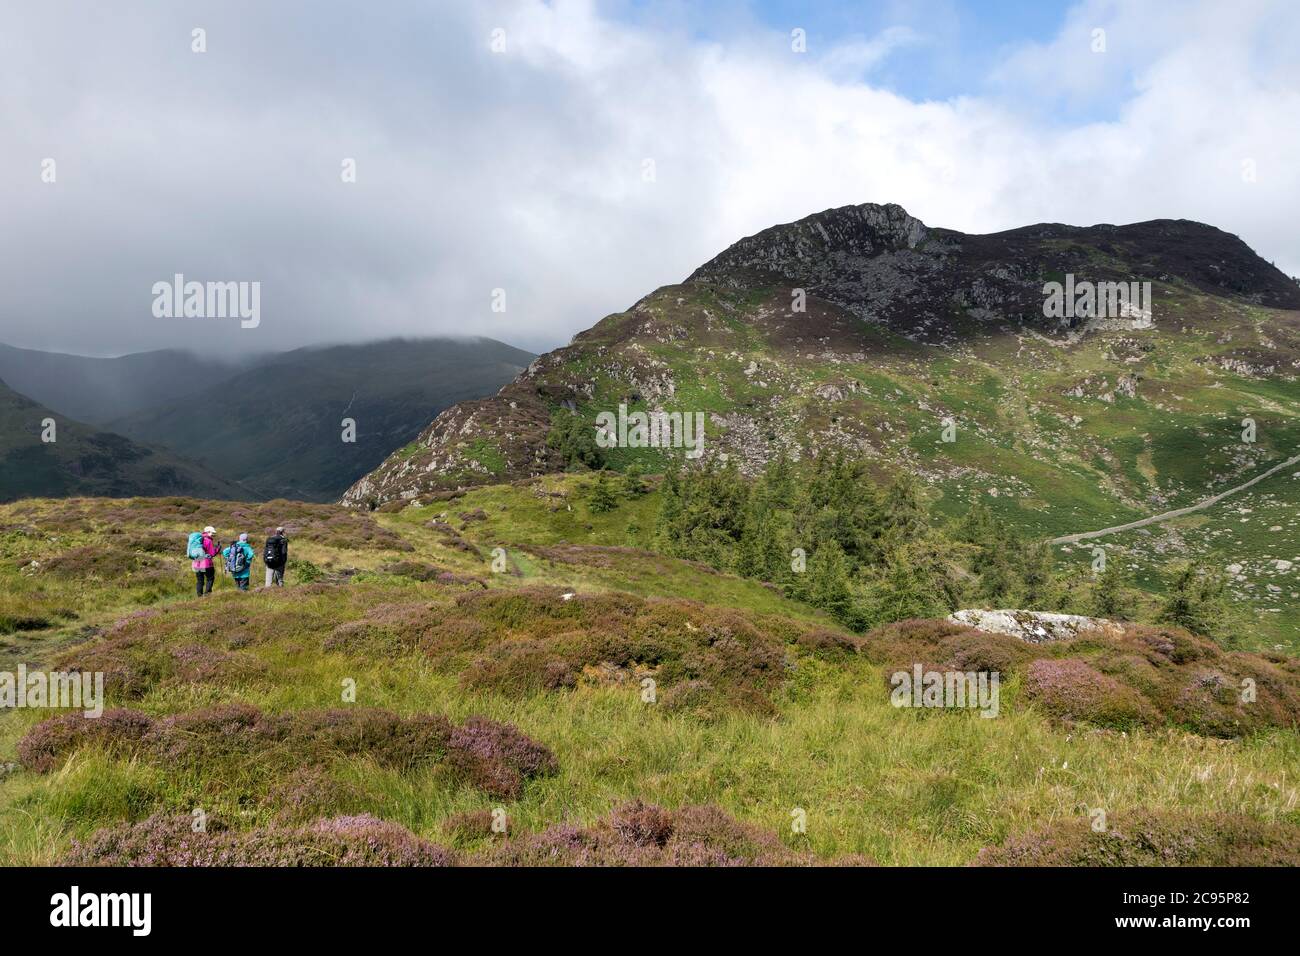 Walkers Heading towards Heron Pike and Sheffield Pike from Glenridding Dodd, Lake District, Cumbria, UK Stock Photo